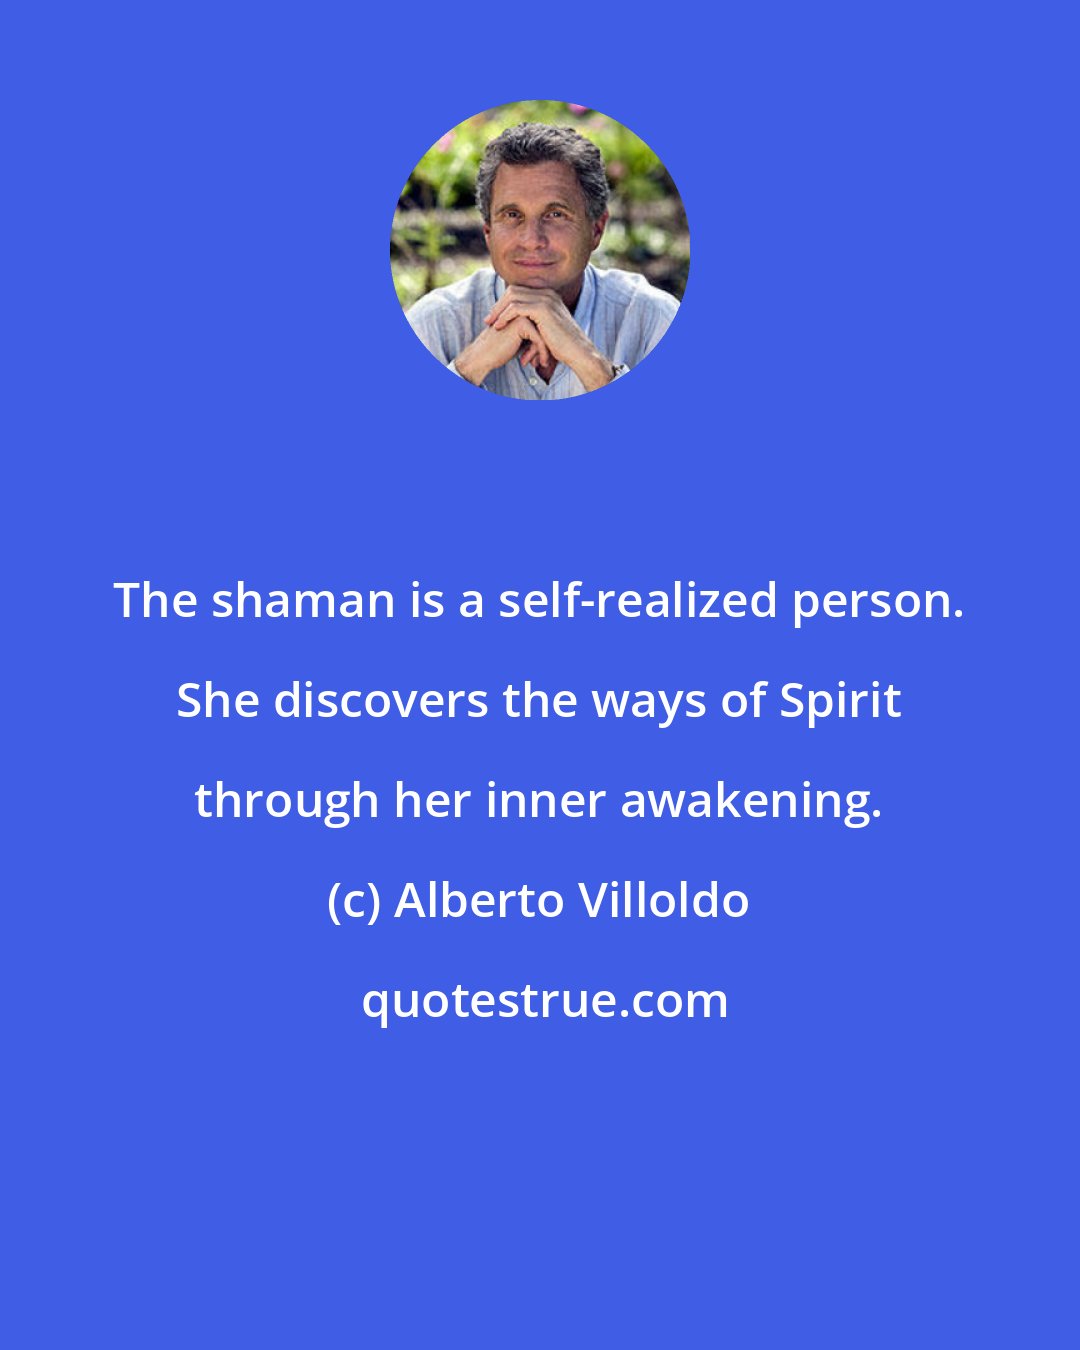 Alberto Villoldo: The shaman is a self-realized person. She discovers the ways of Spirit through her inner awakening.